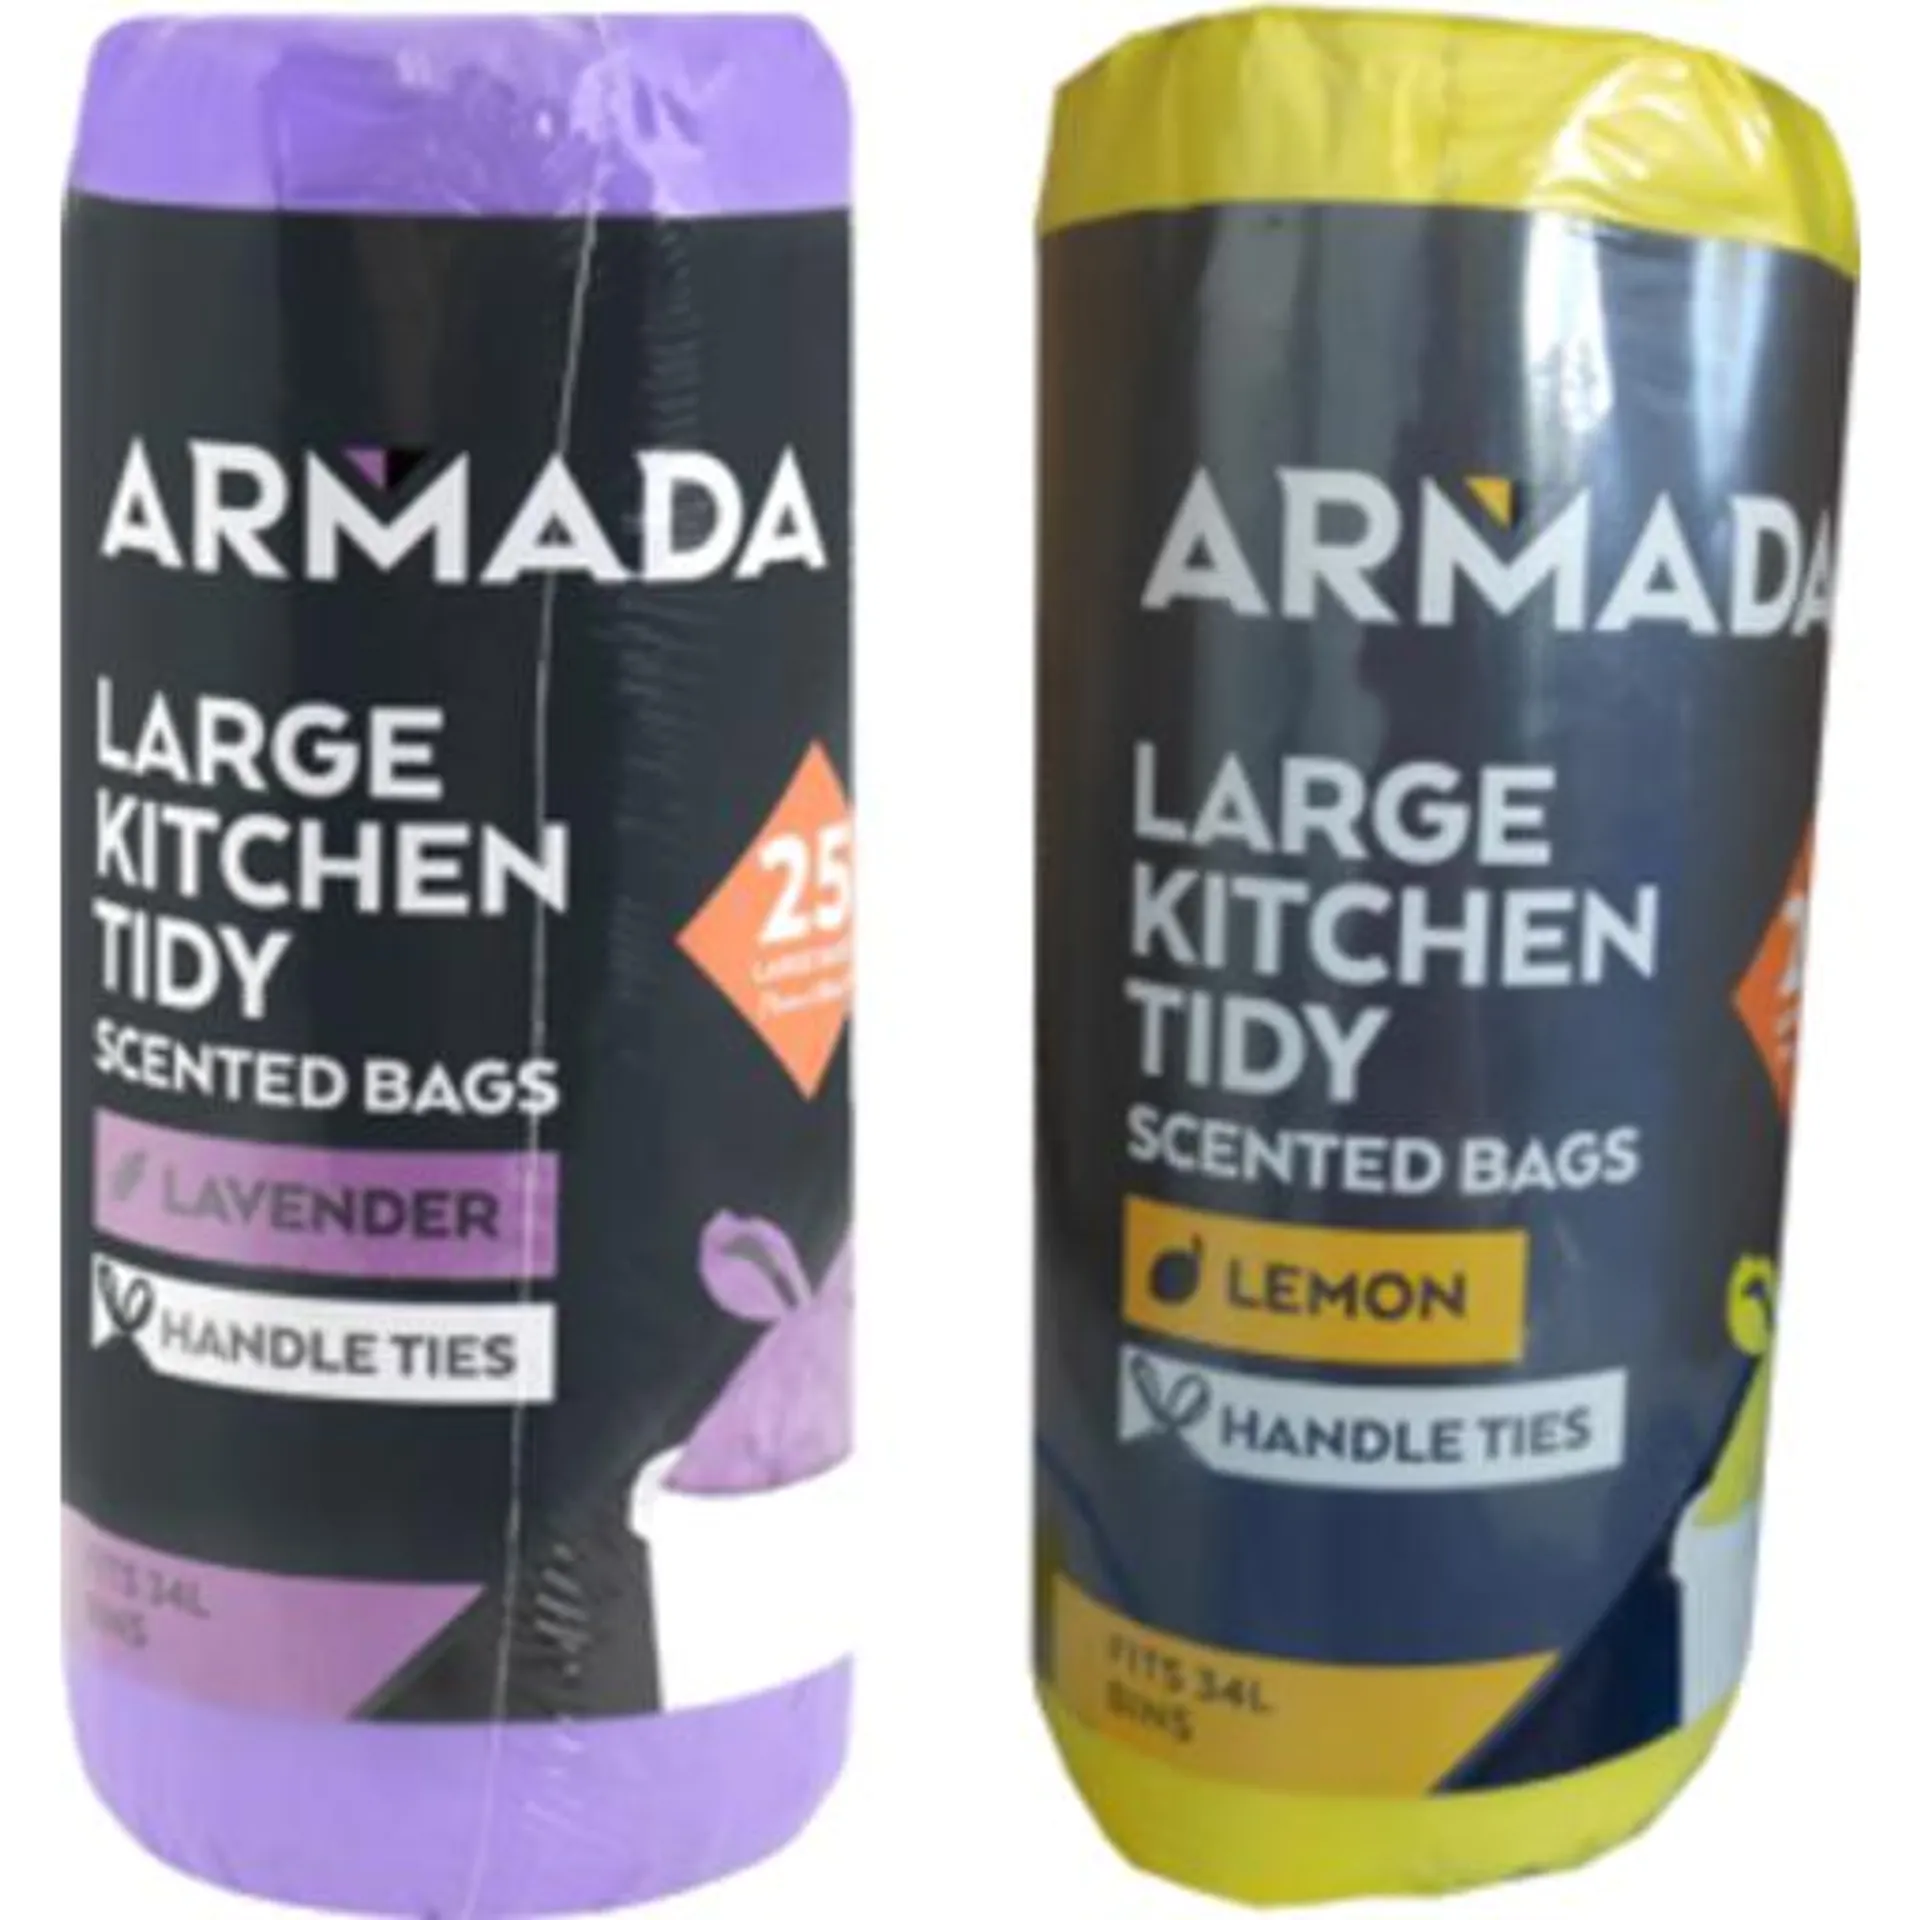 Armada Large Kitchen Tidy Scented Bags 25 Pack